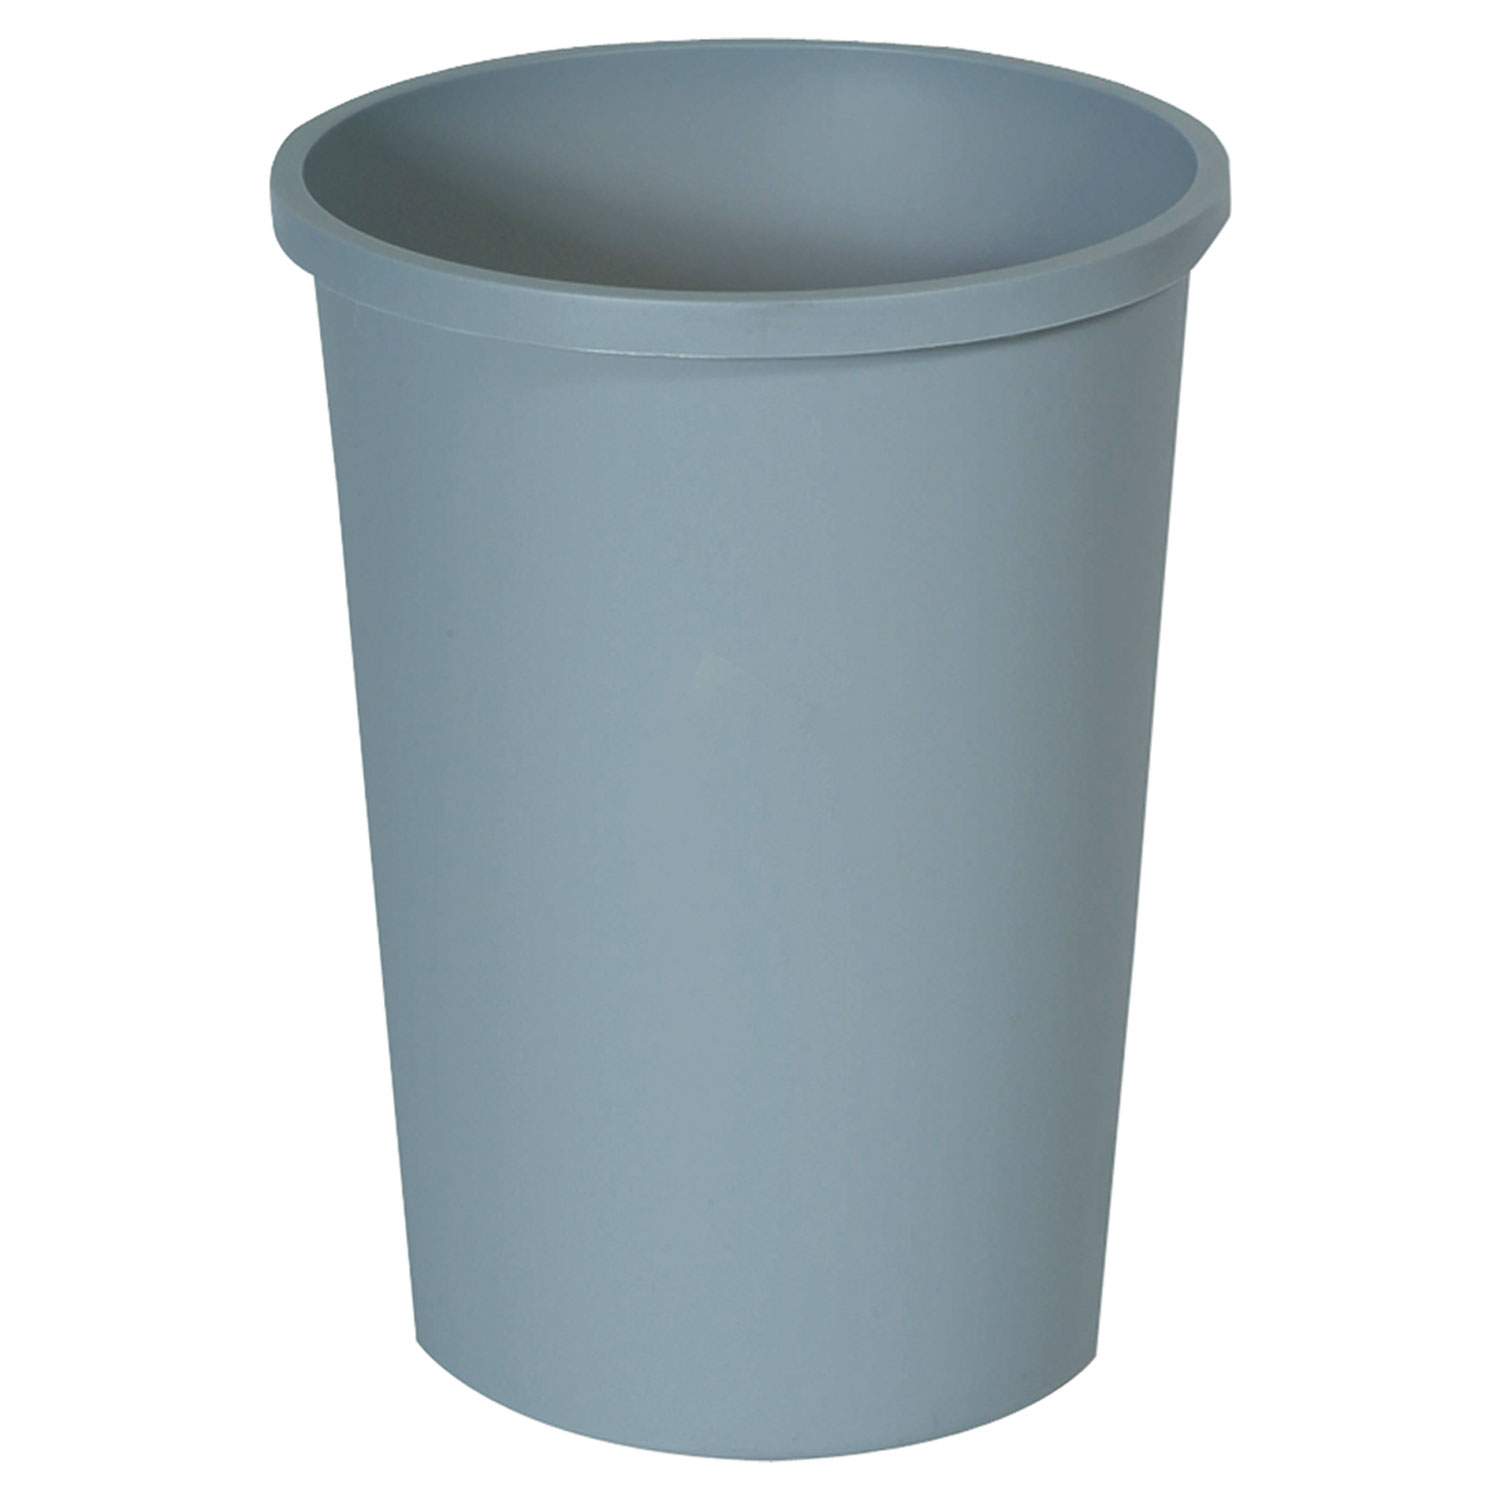  Rubbermaid Commercial 294700GRAY Untouchable Waste Container, Round, Plastic, 11 gal, Gray (RCP2947GRA) 